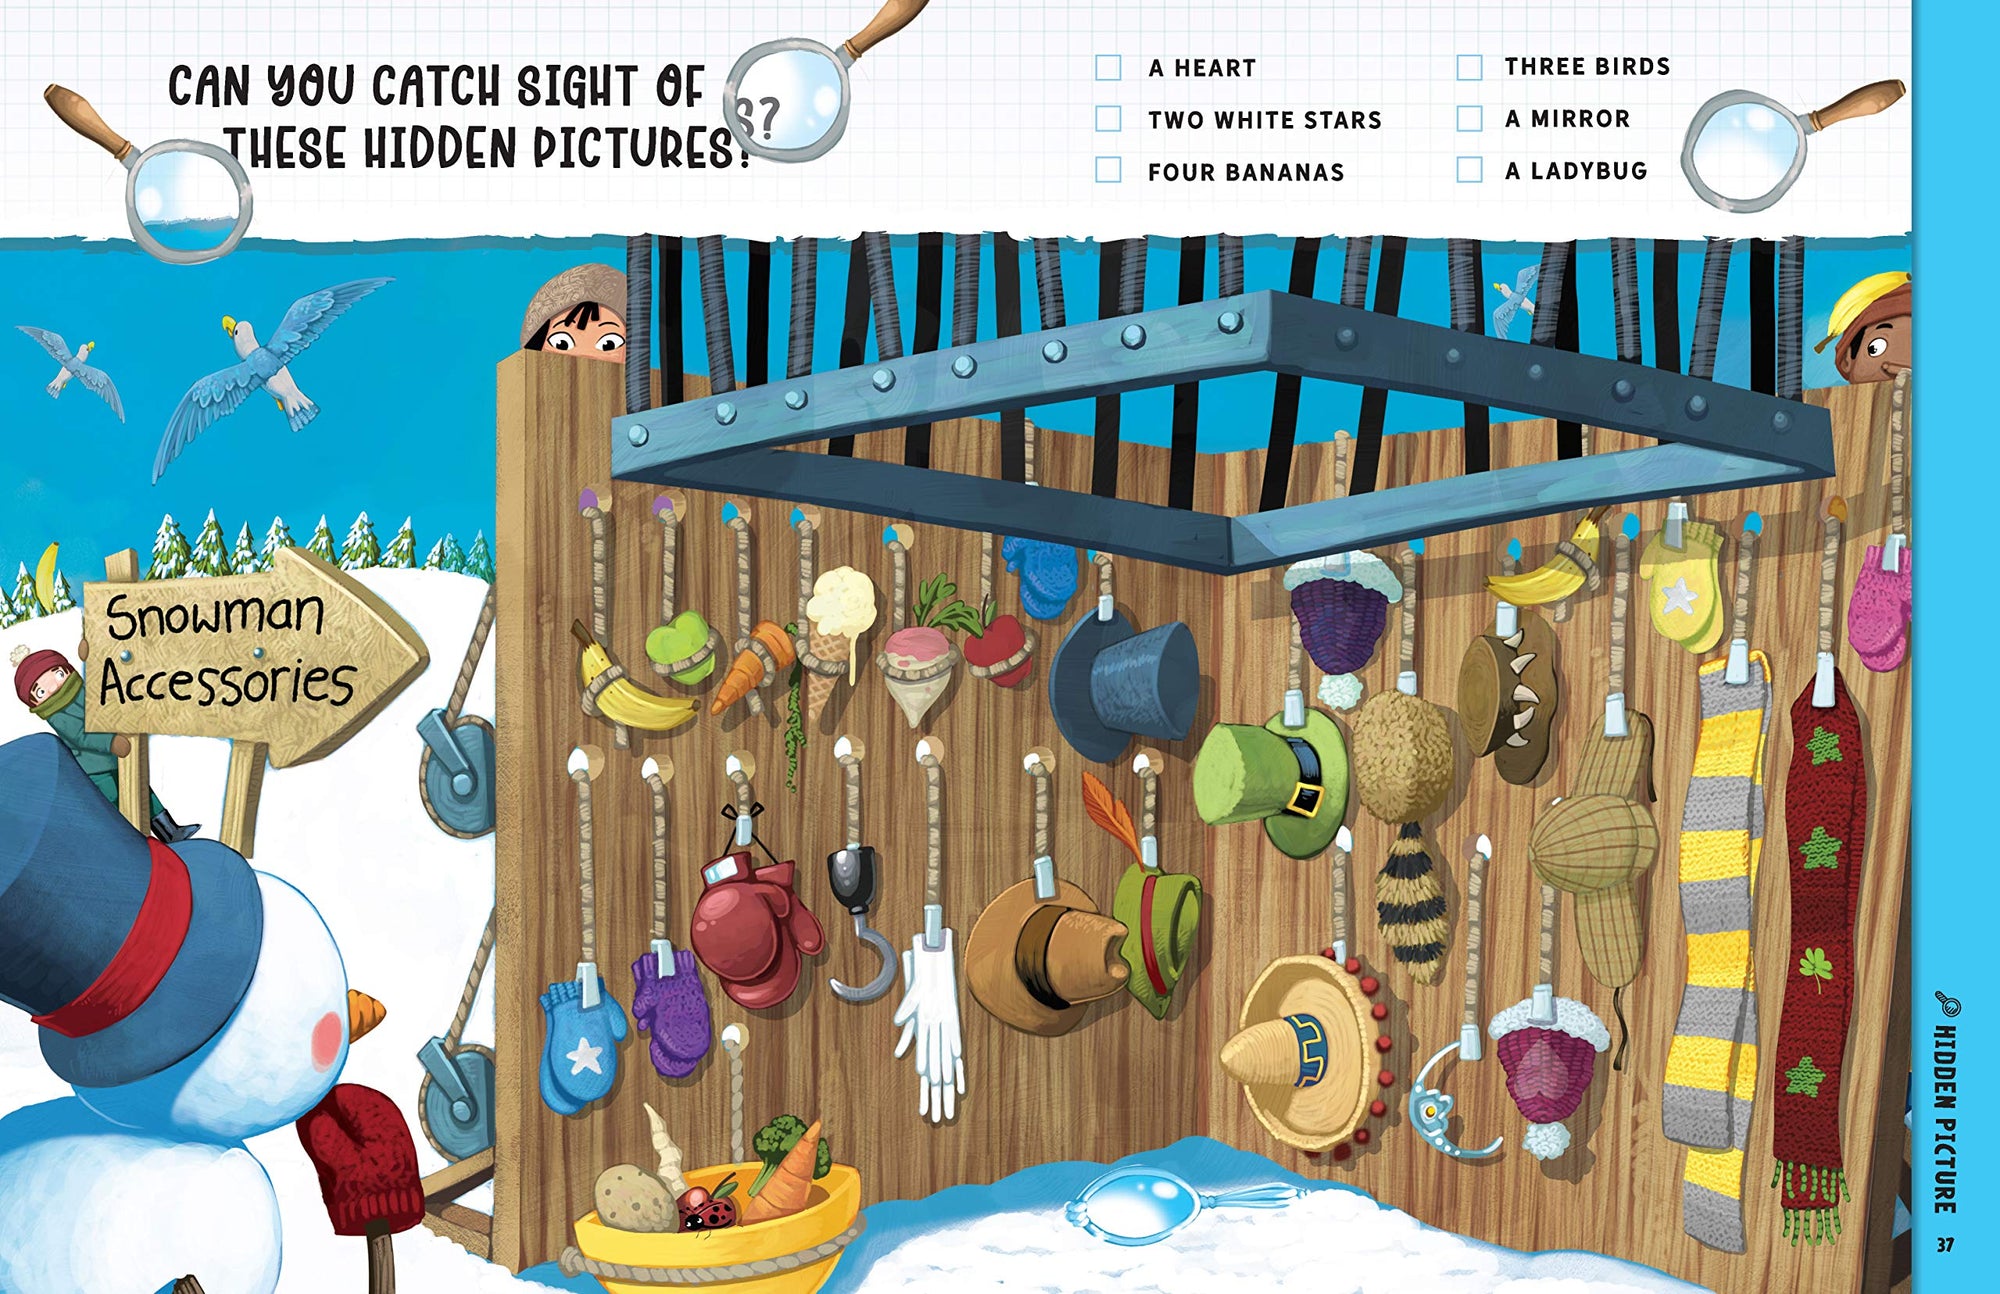 The Giant How to Catch Activity Book for Kids